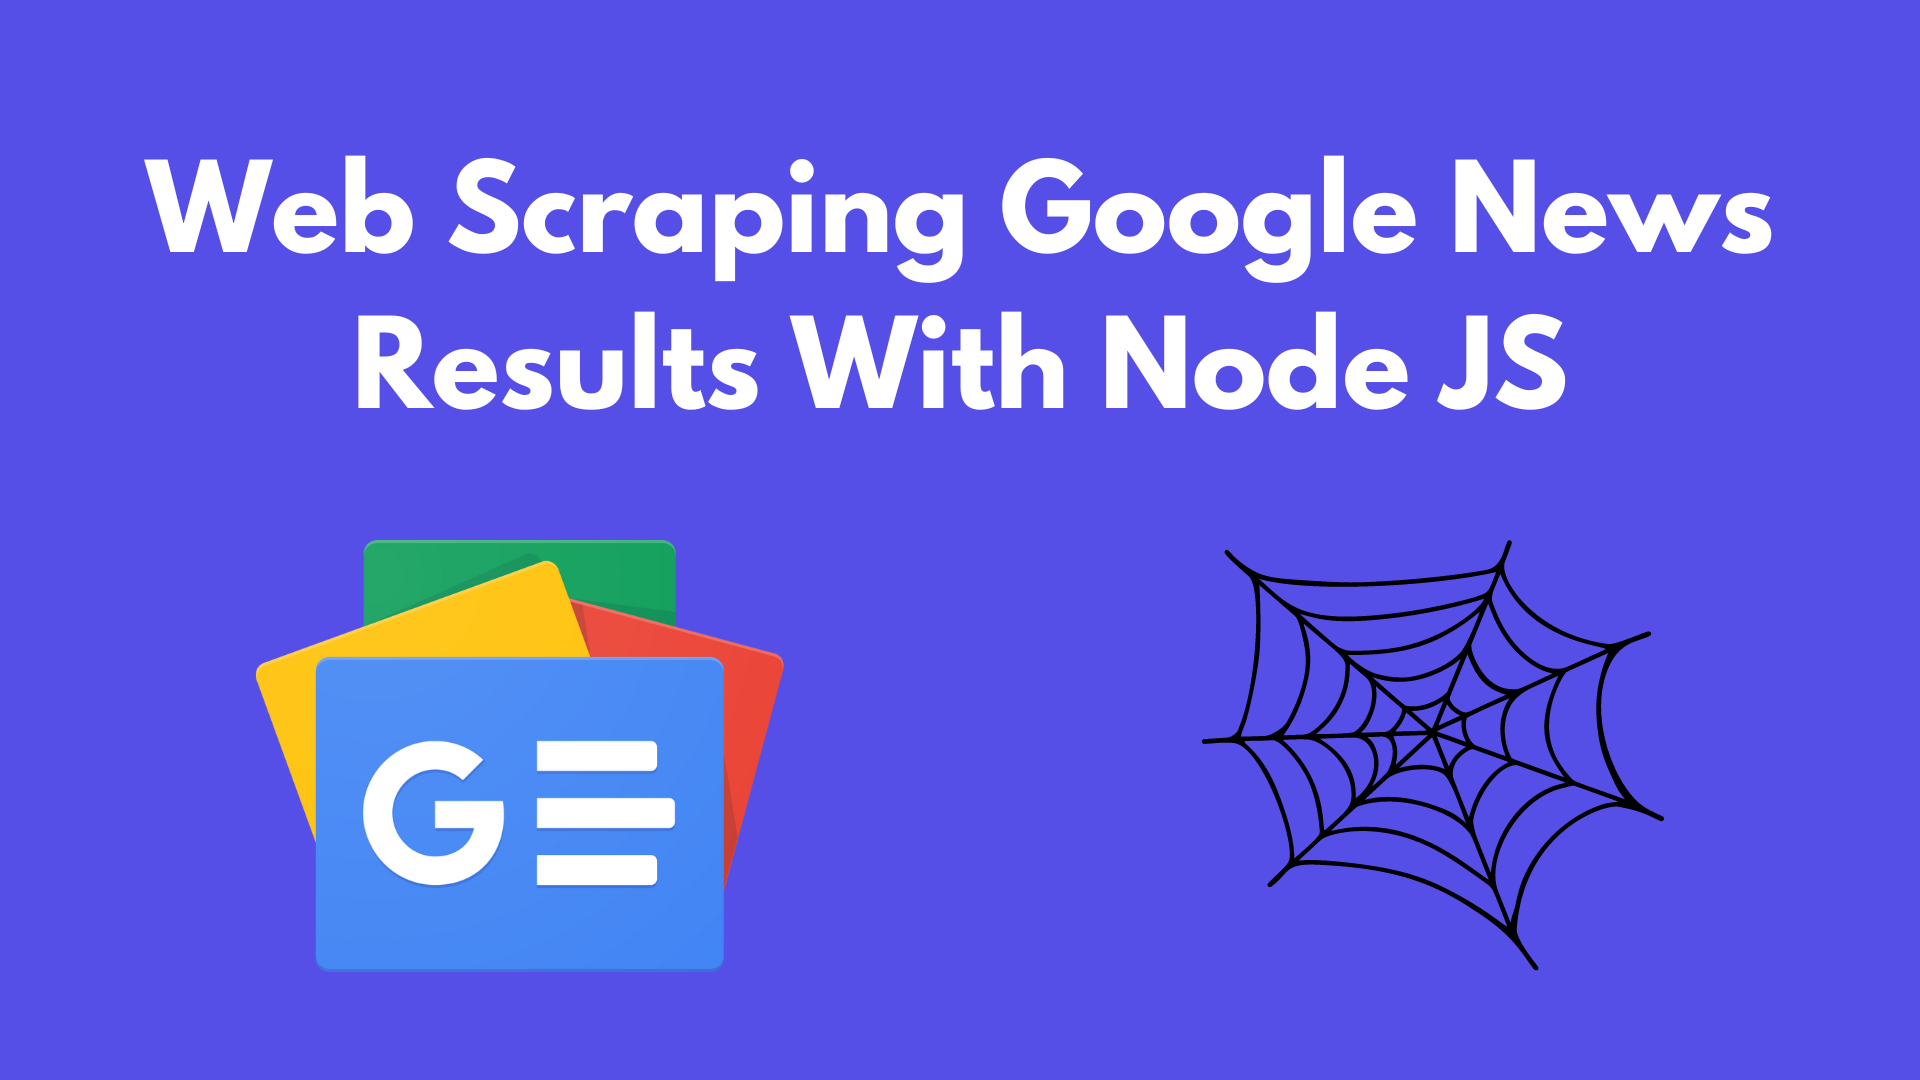 Web scraping Google News Results with Node JS